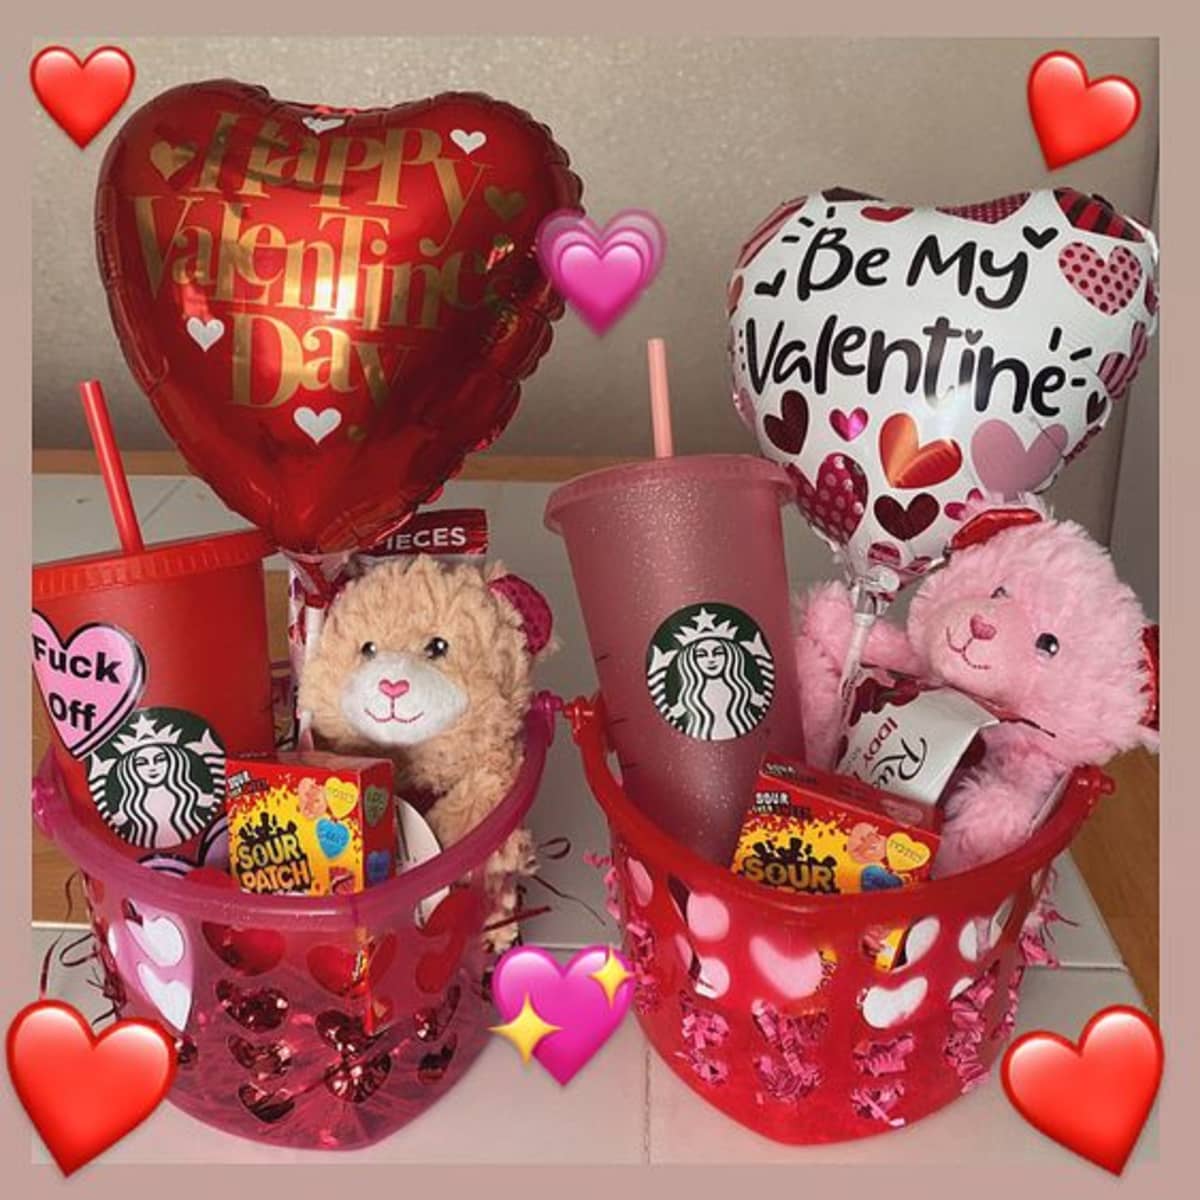 Heart Crafts for Adults You're Going to Love - DIY Candy